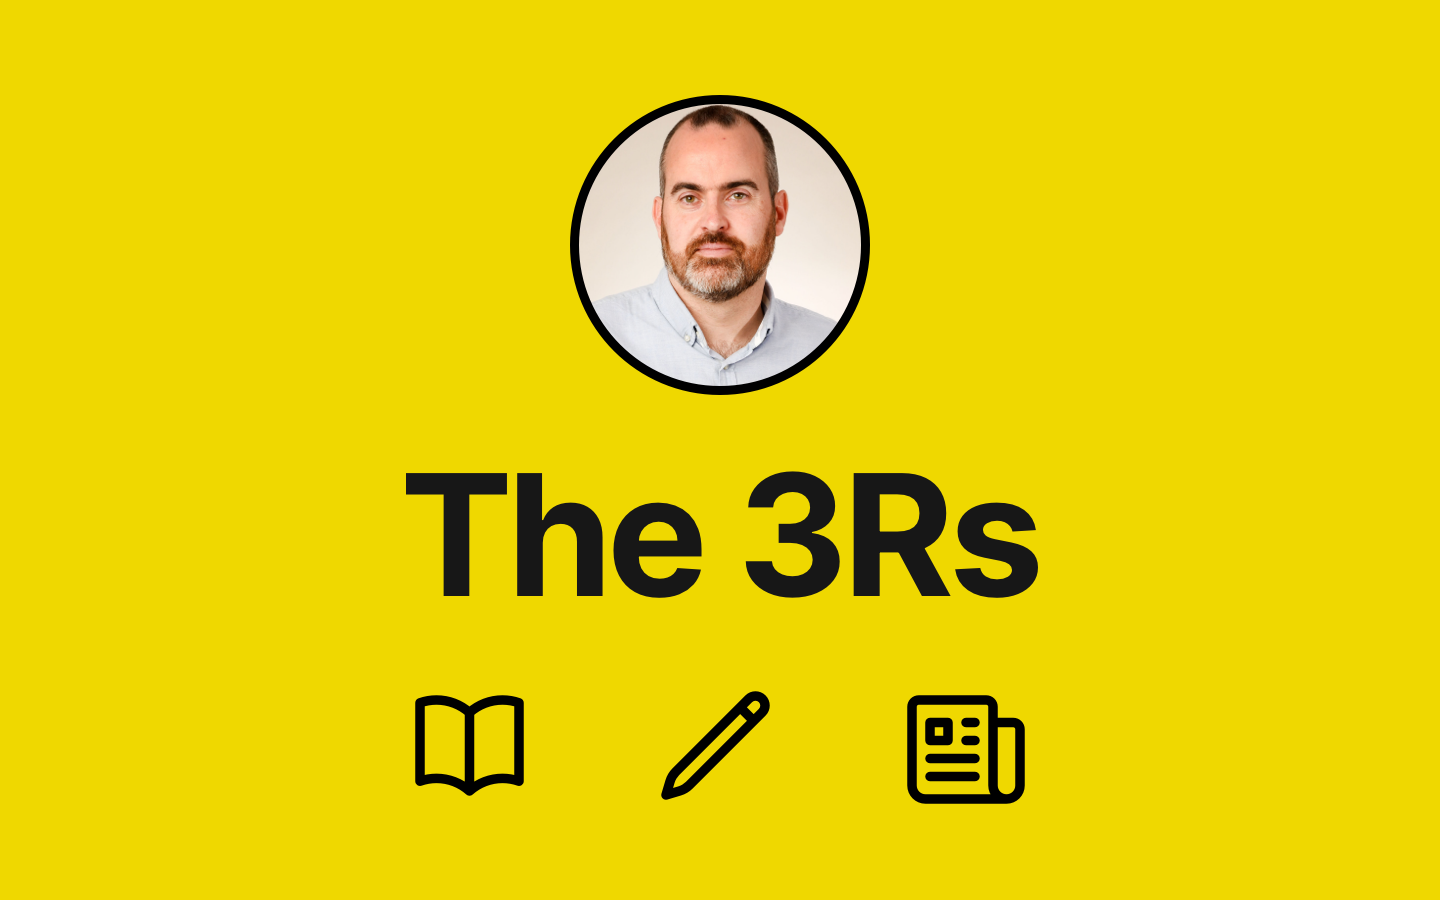 The 3Rs - Reading, writing, and research to be interested in #44 Post feature image